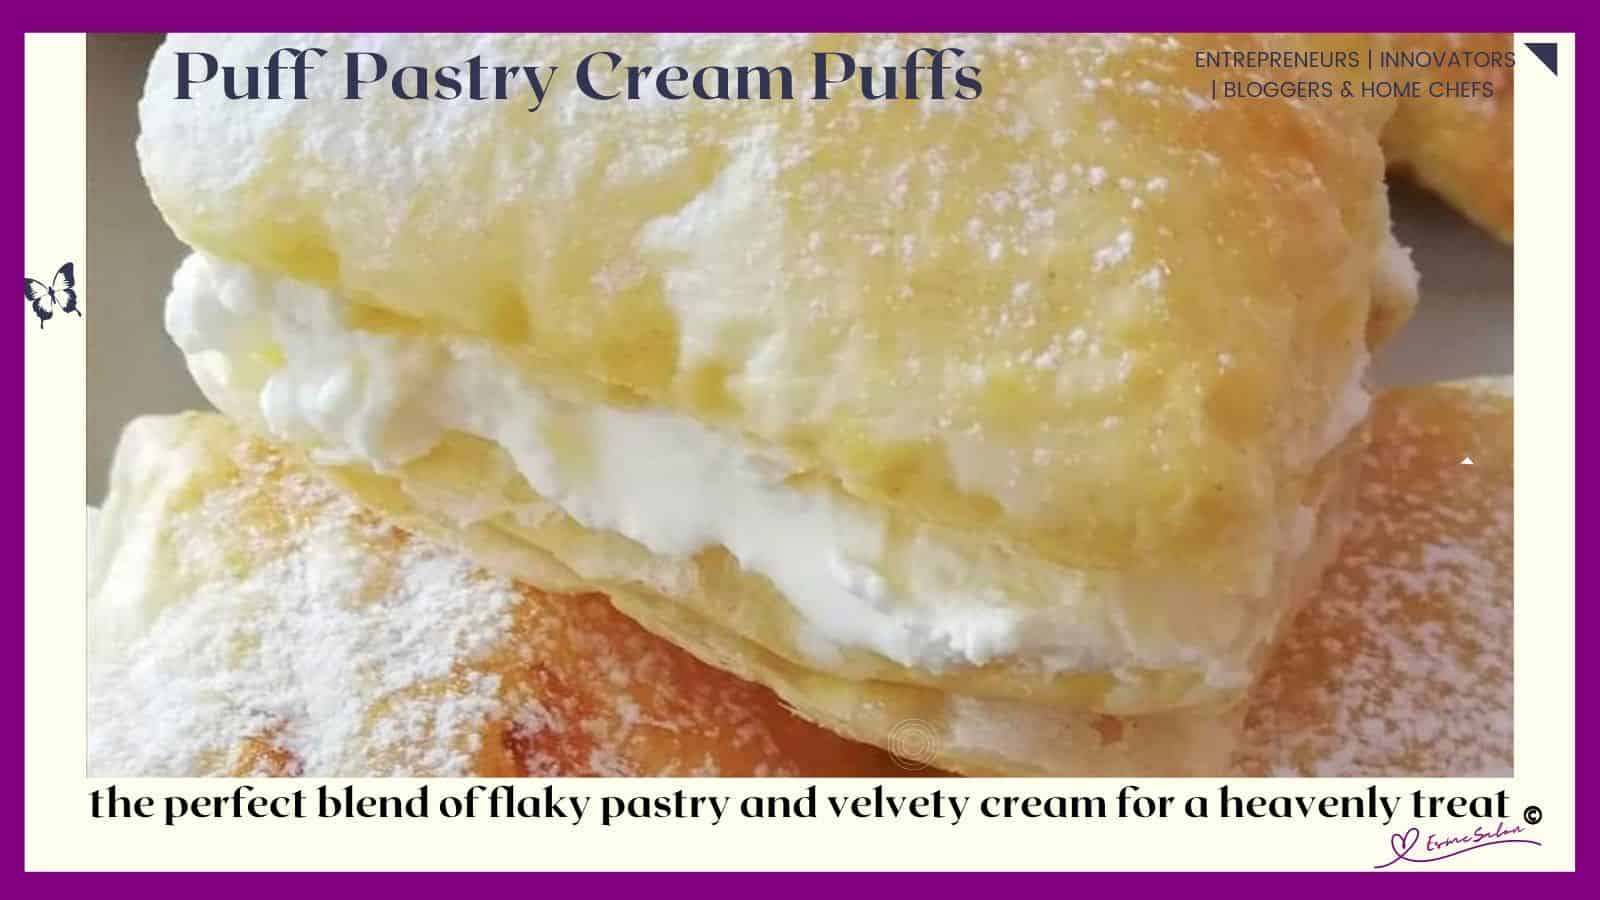 an image of Ready-made Puff Pastry filled with Cream and nuts